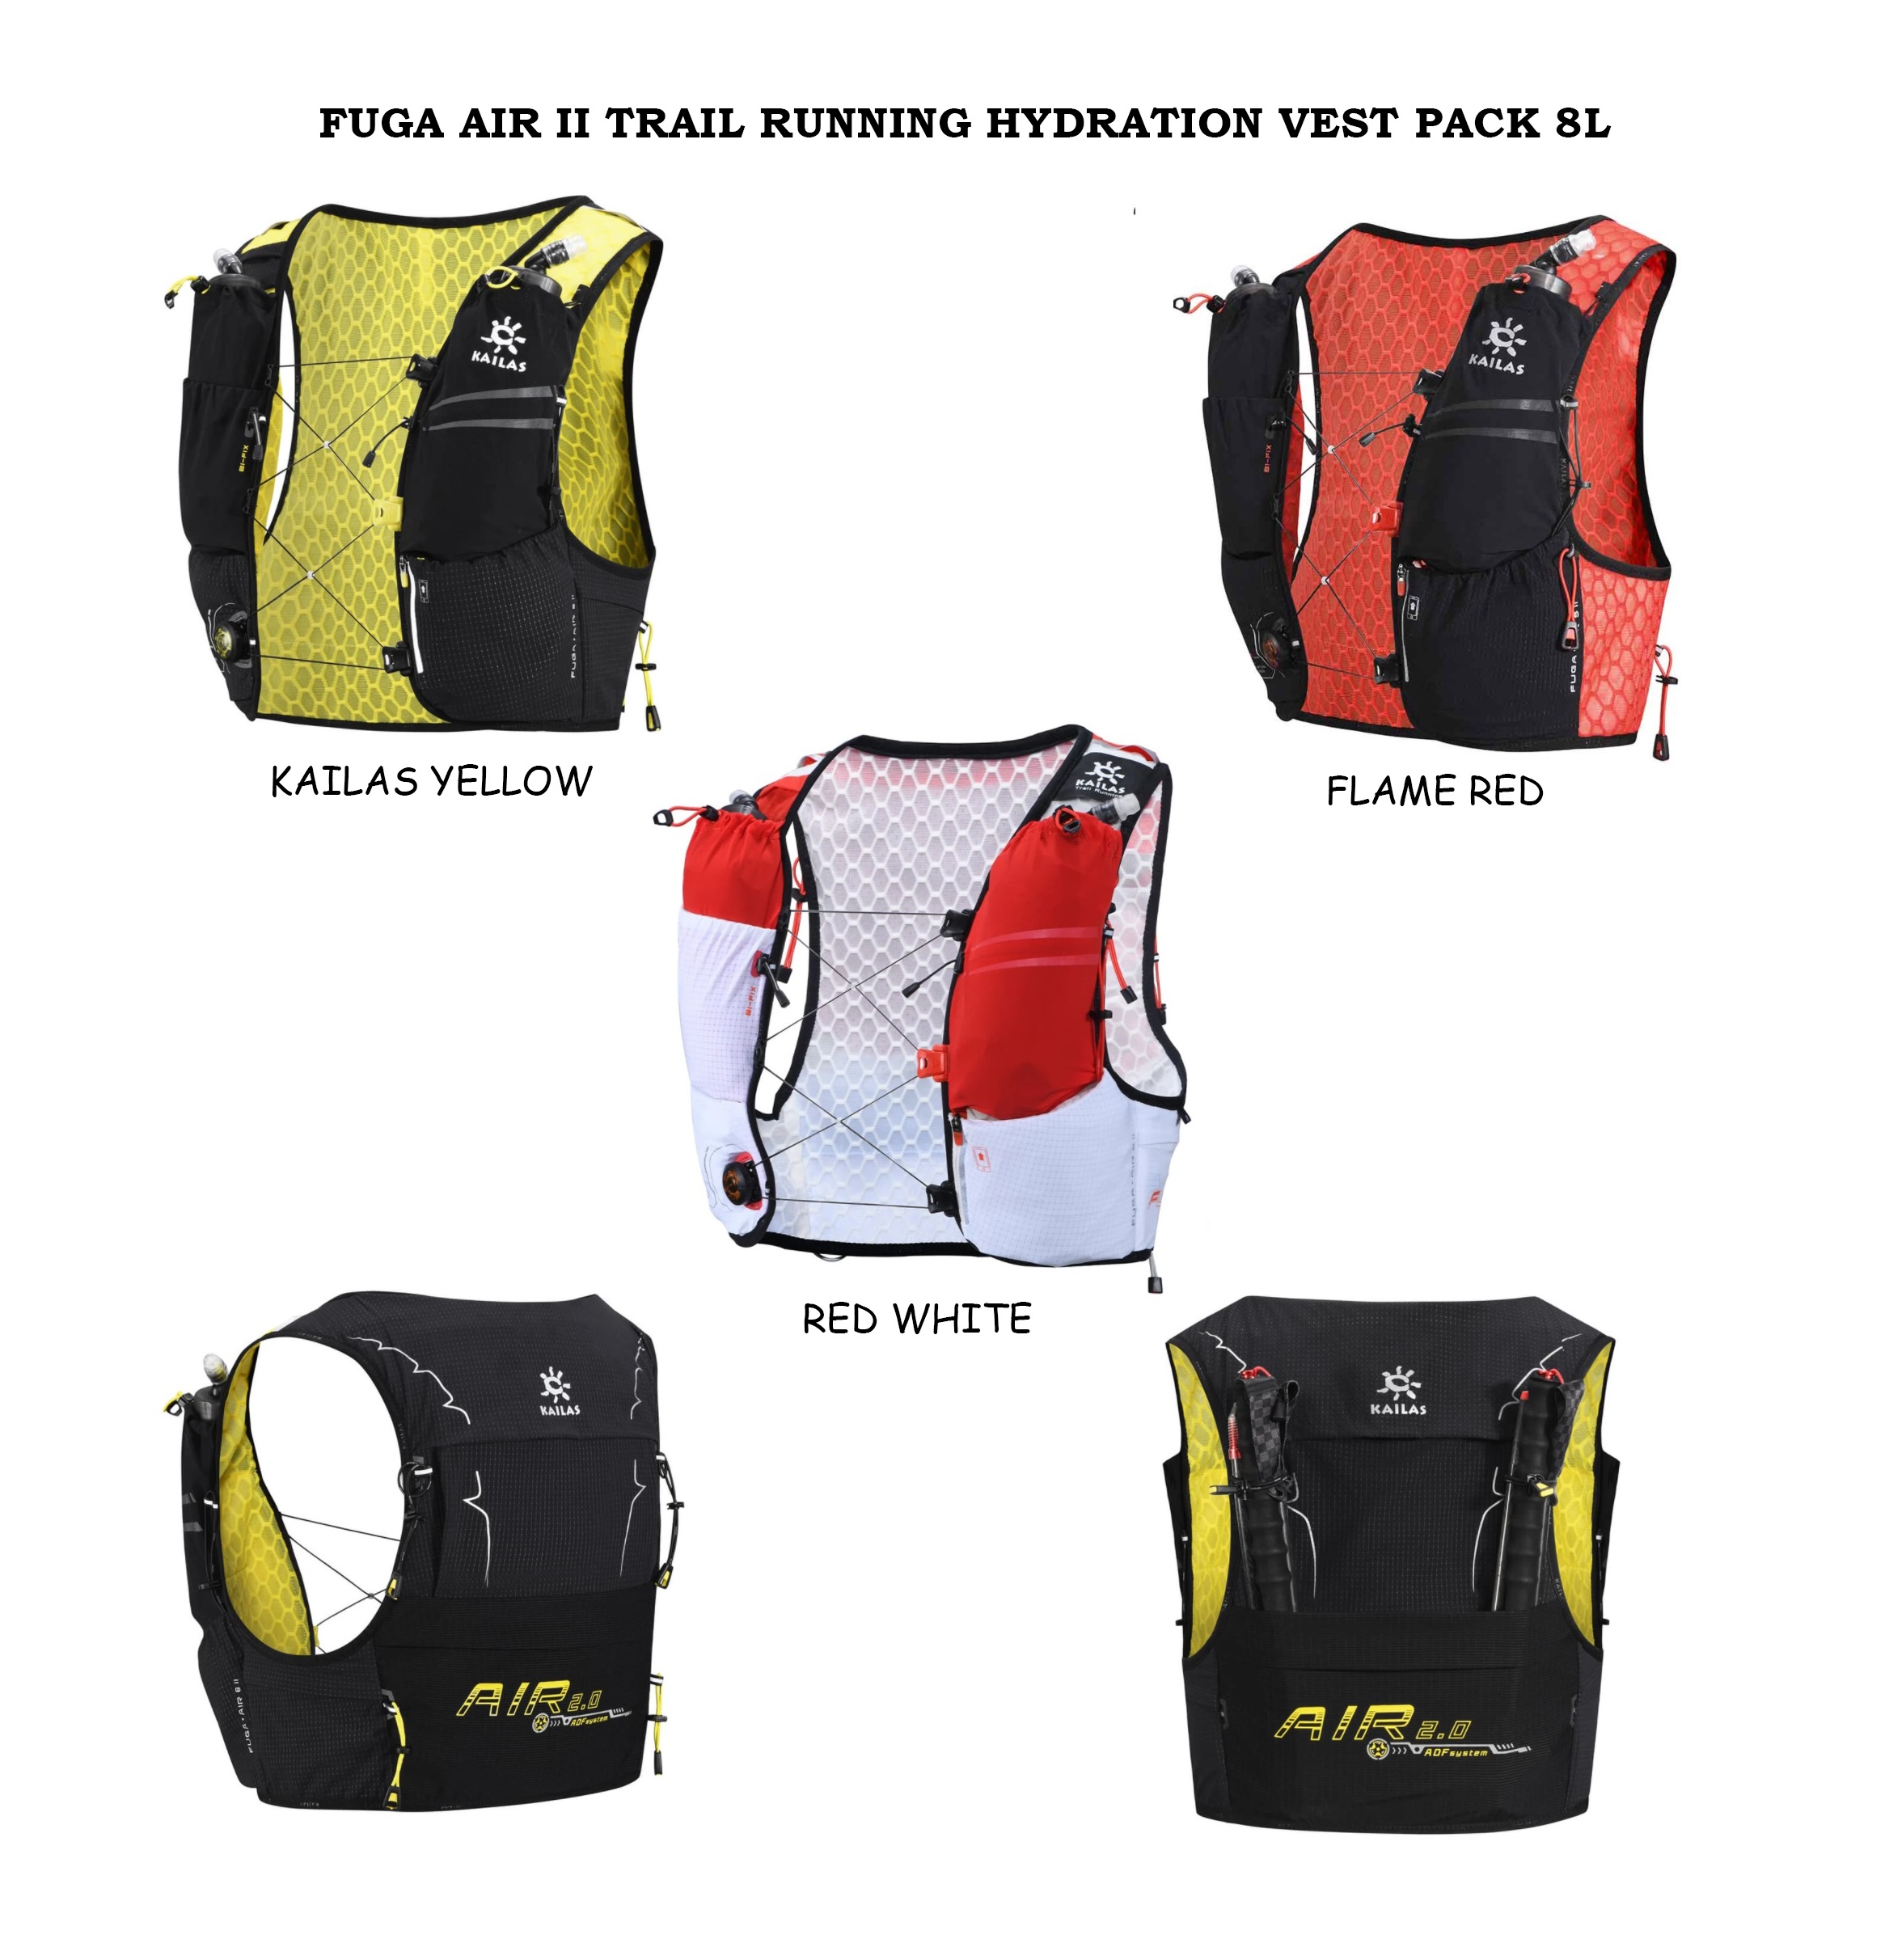 Kailas Fuga Air II Trail Running Hydration Vest Pack –